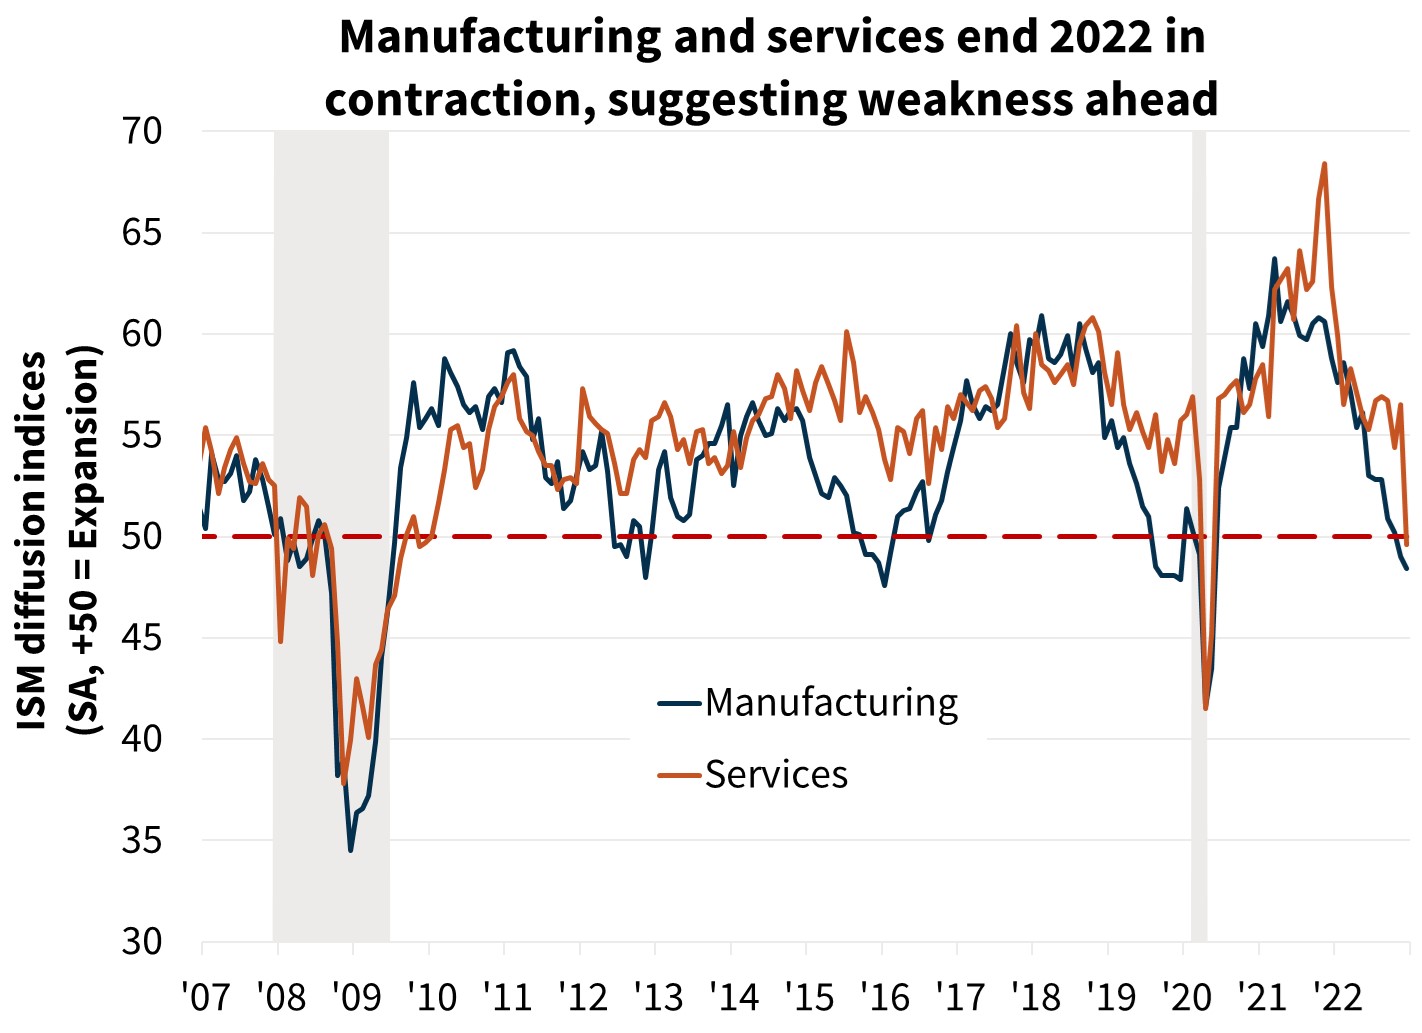  Manufacturing and services end 2022 in contraction, suggesting weakness ahead 